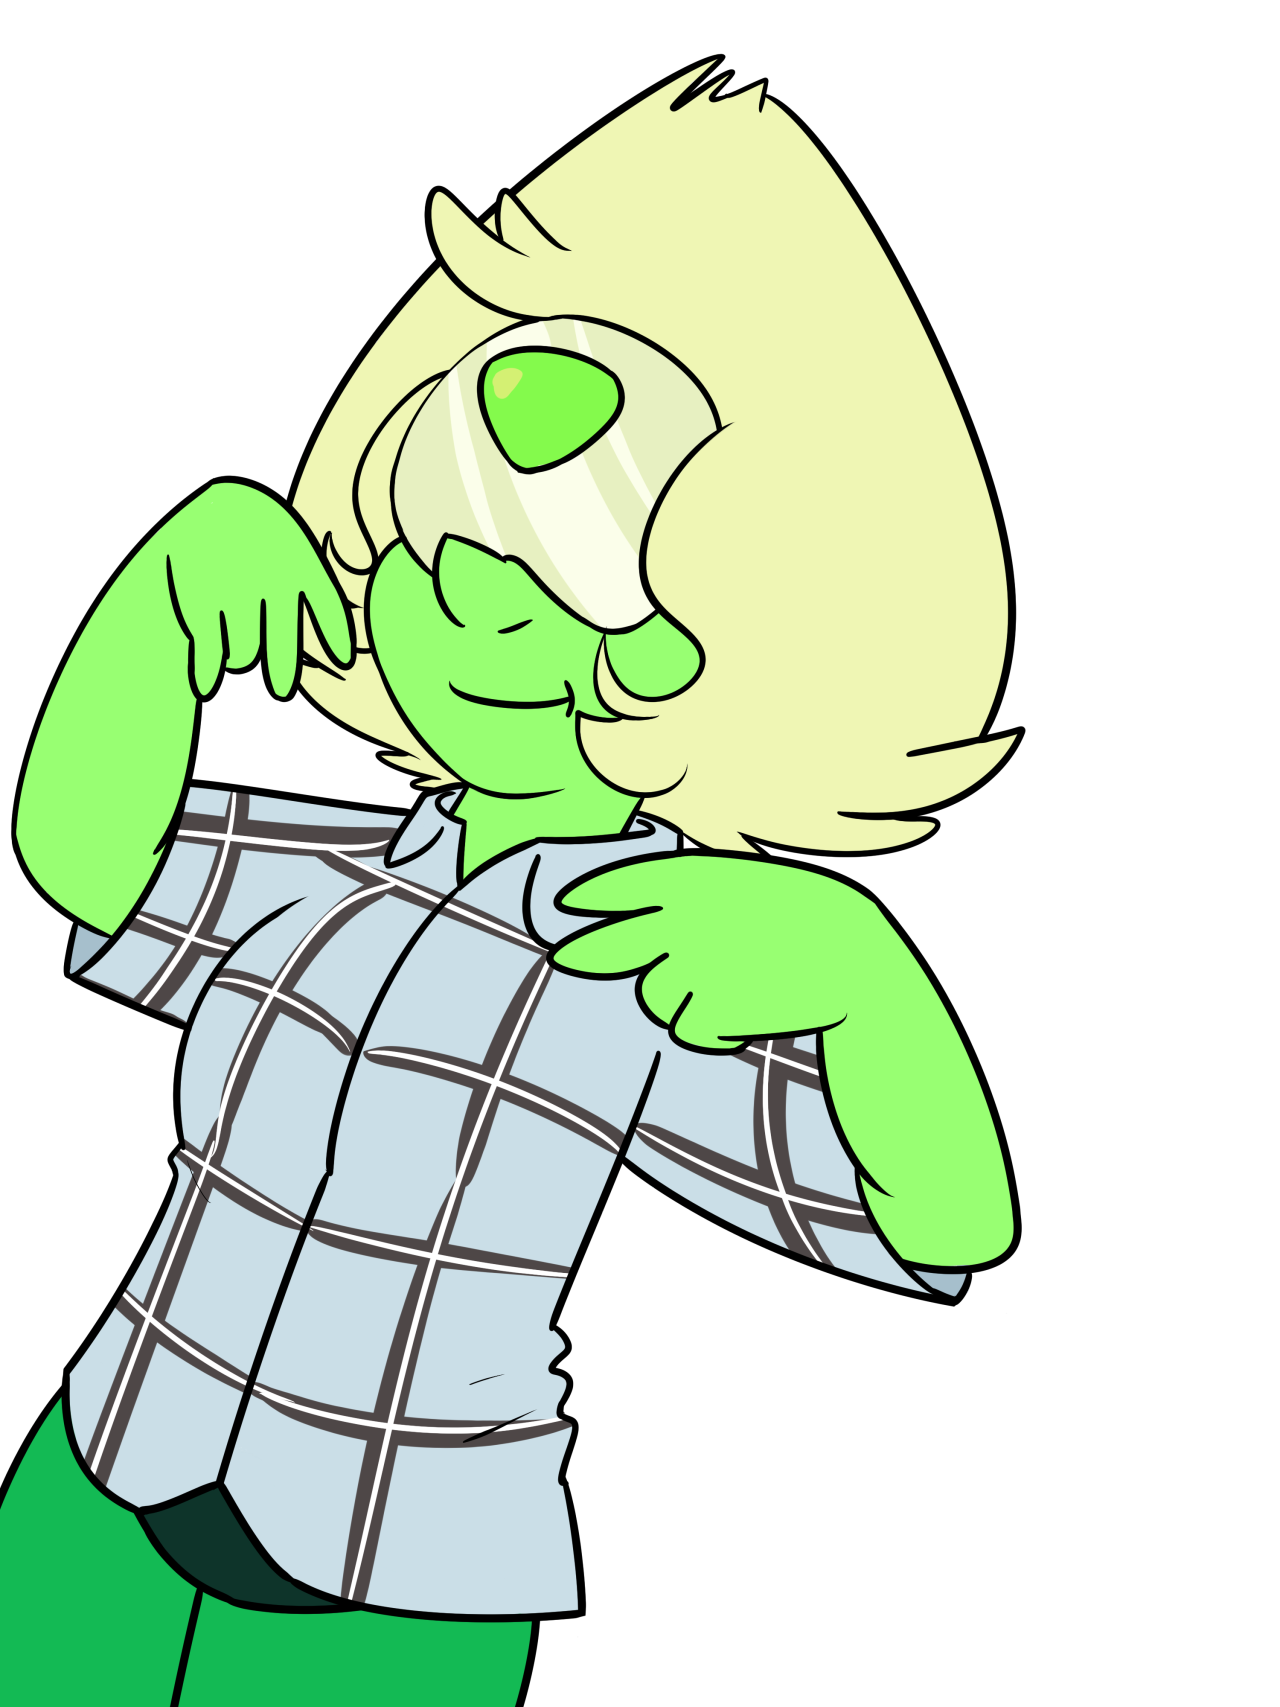 Debate clipart kid discussion. Peridot looked up cool